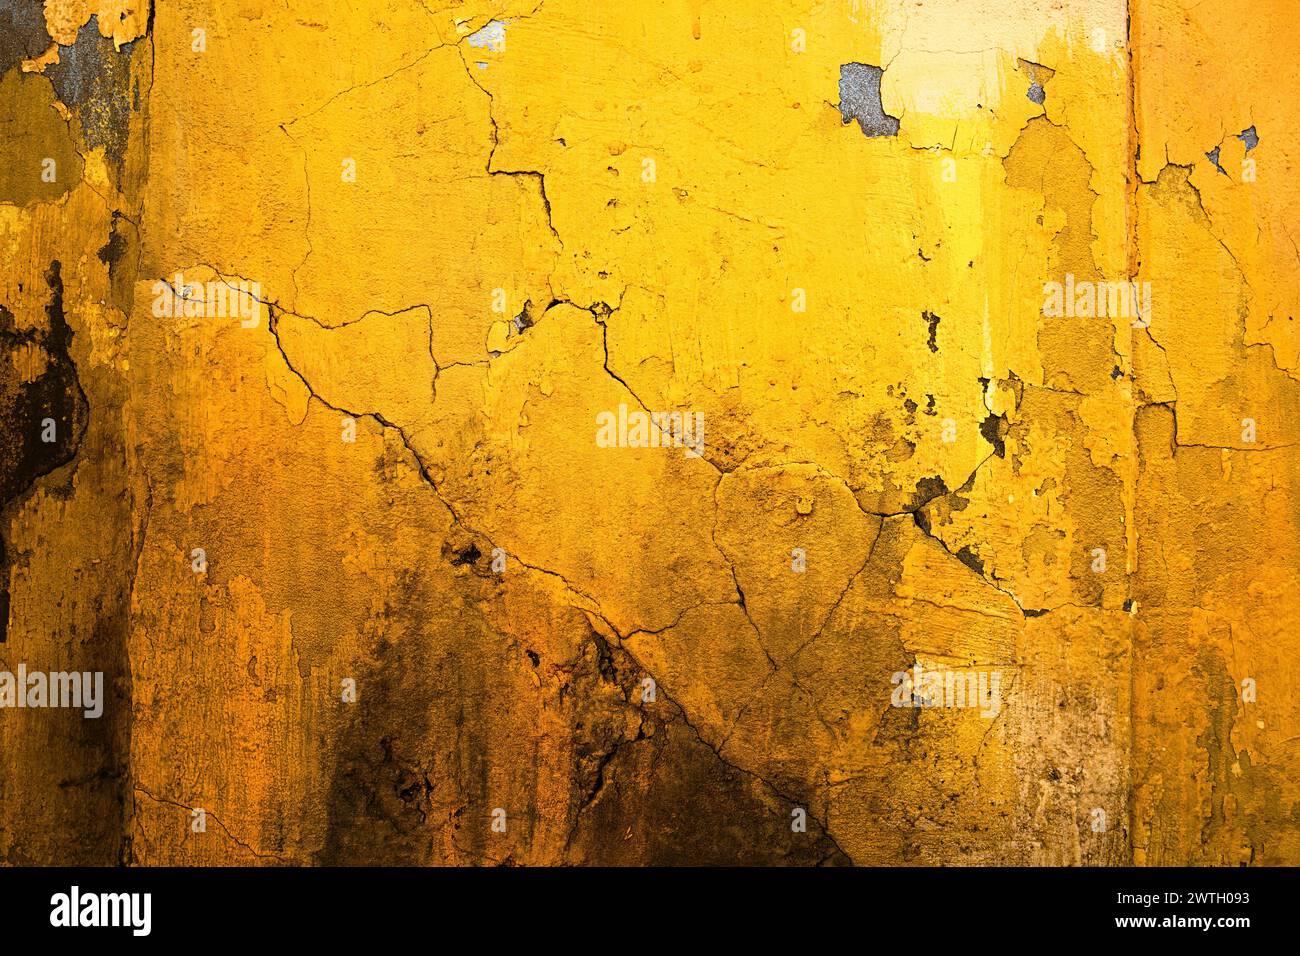 Vibrant yellow wall of old ruined house with cracks and stains as background and texture Stock Photo